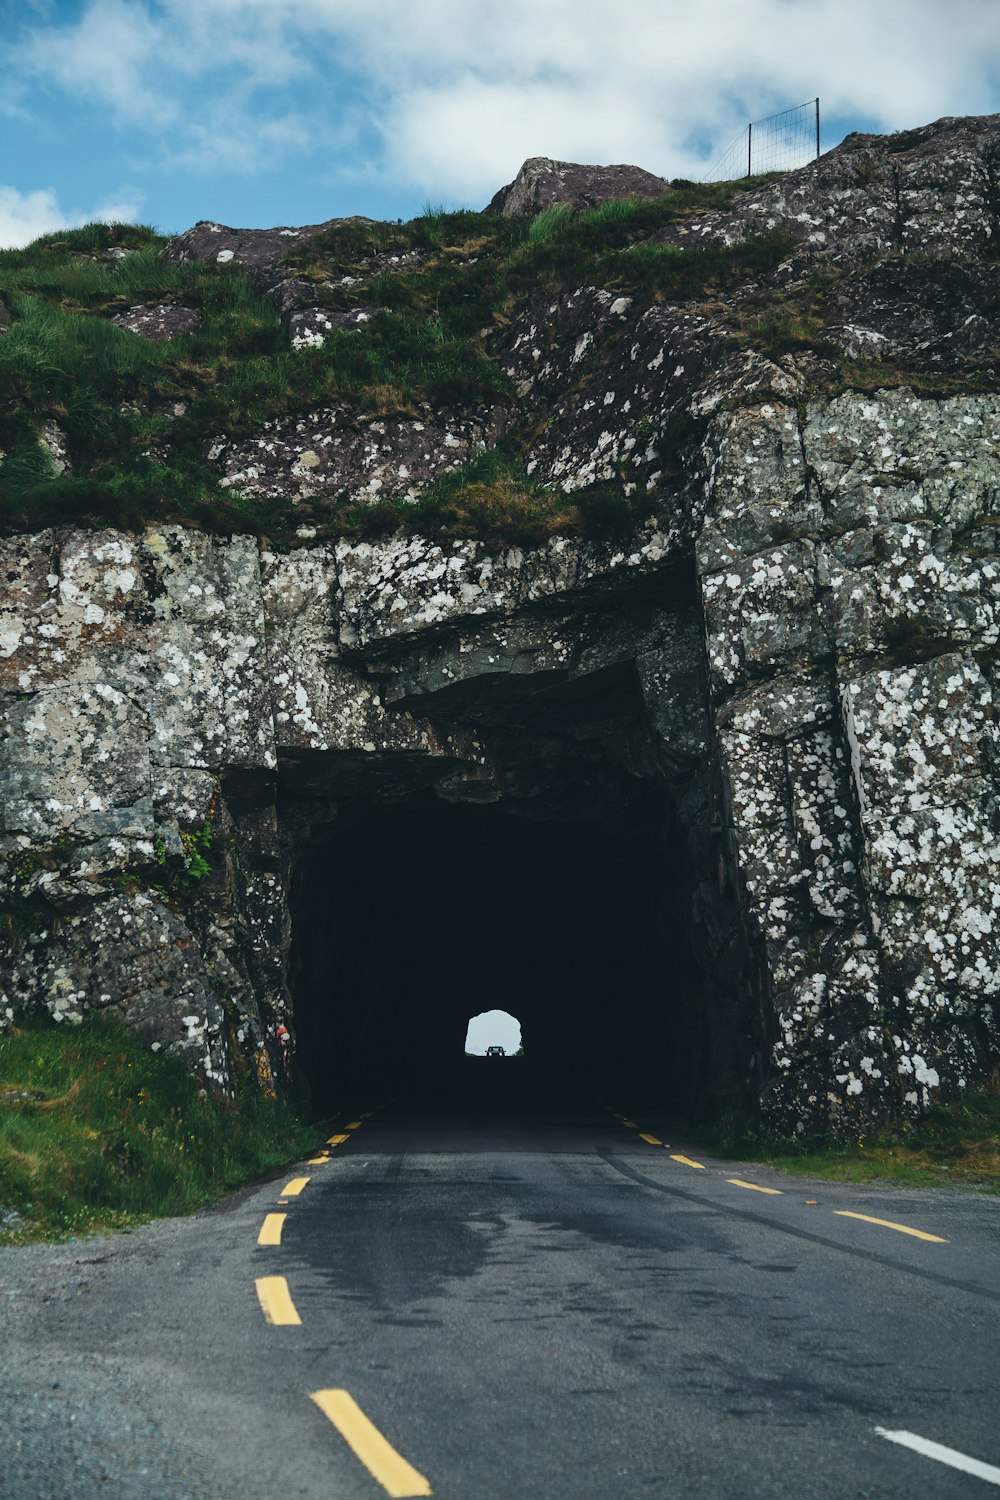 a car driving into a tunnel on a road